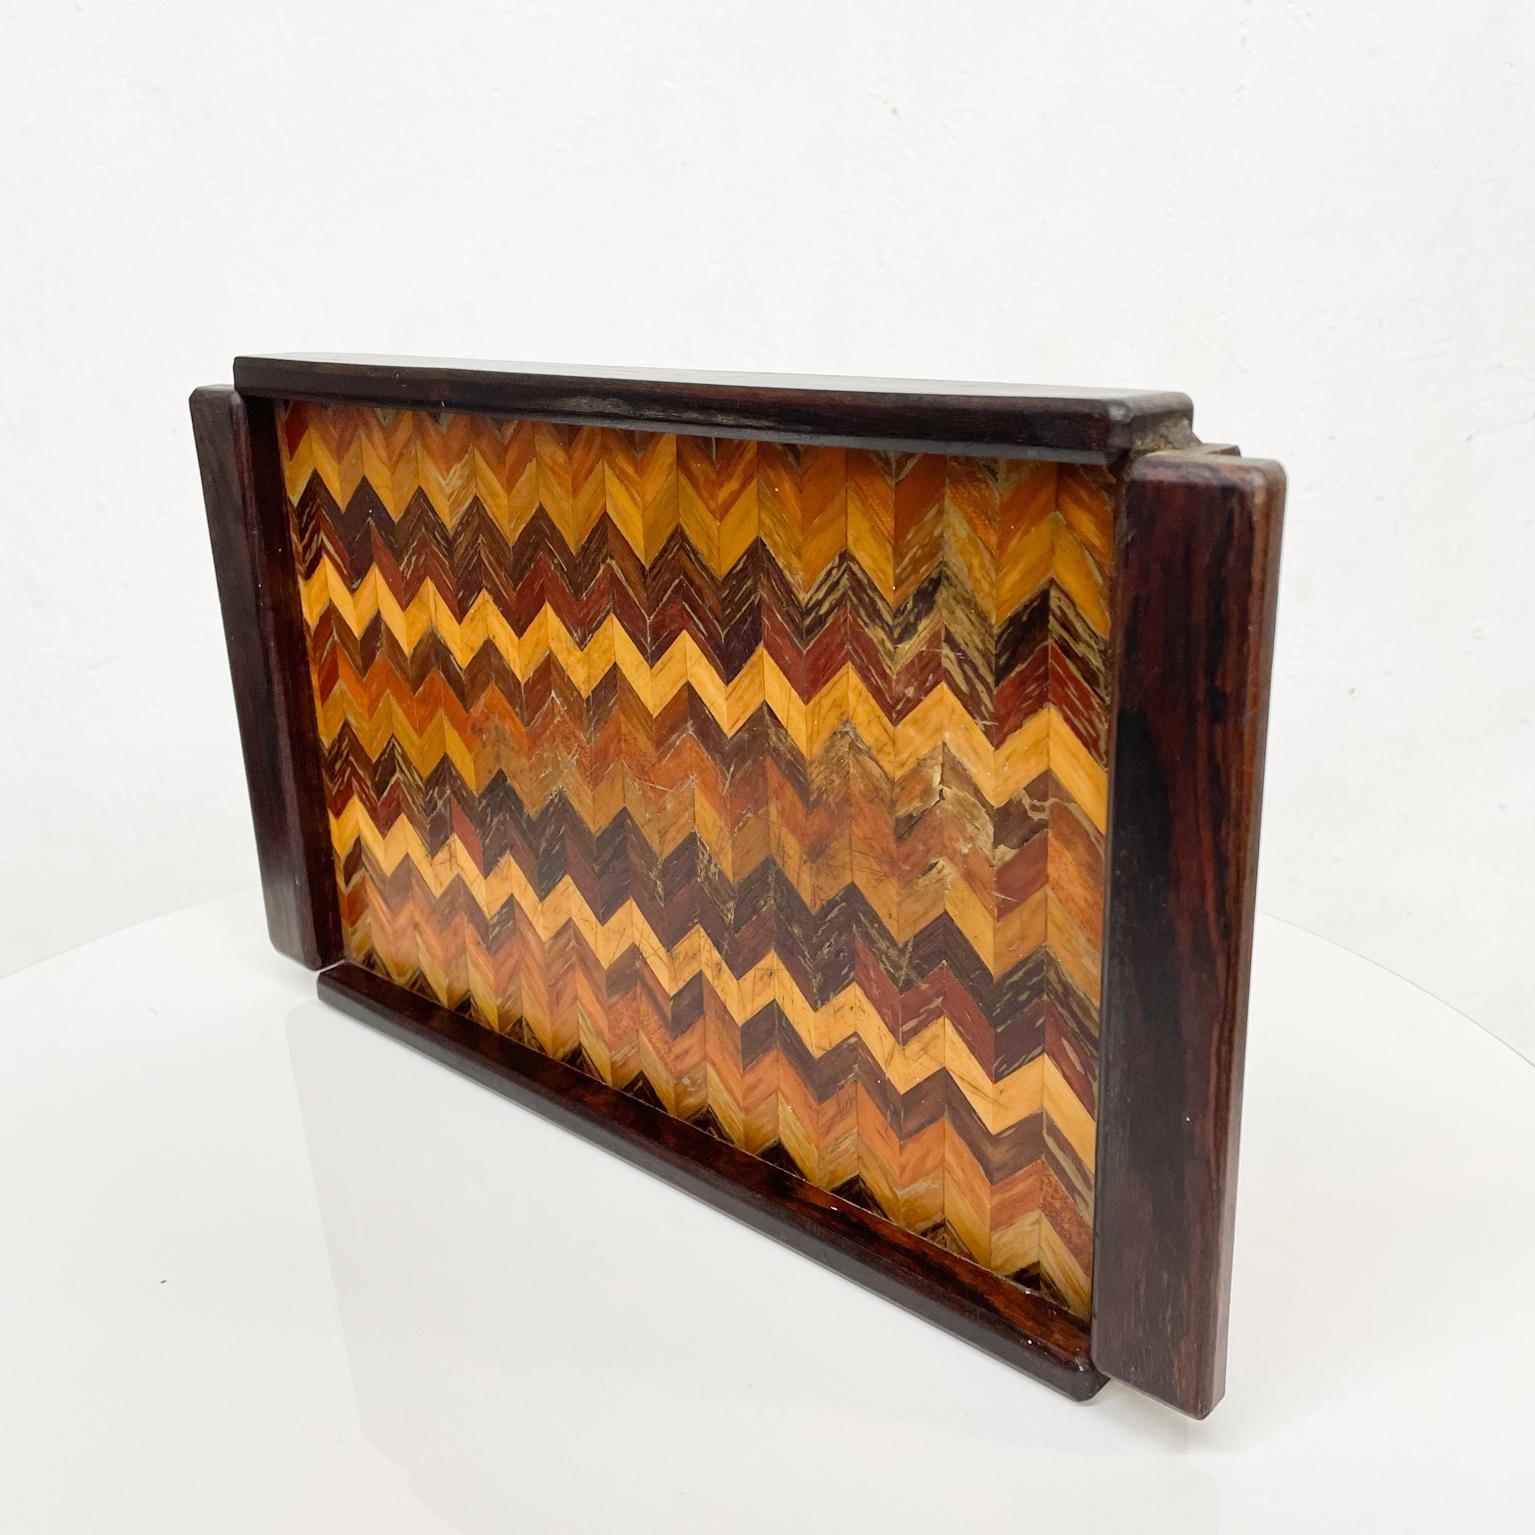 Mexican 1950s Don Shoemaker Señal Serving Tray in Cocobolo Exotic Wood from Mexico